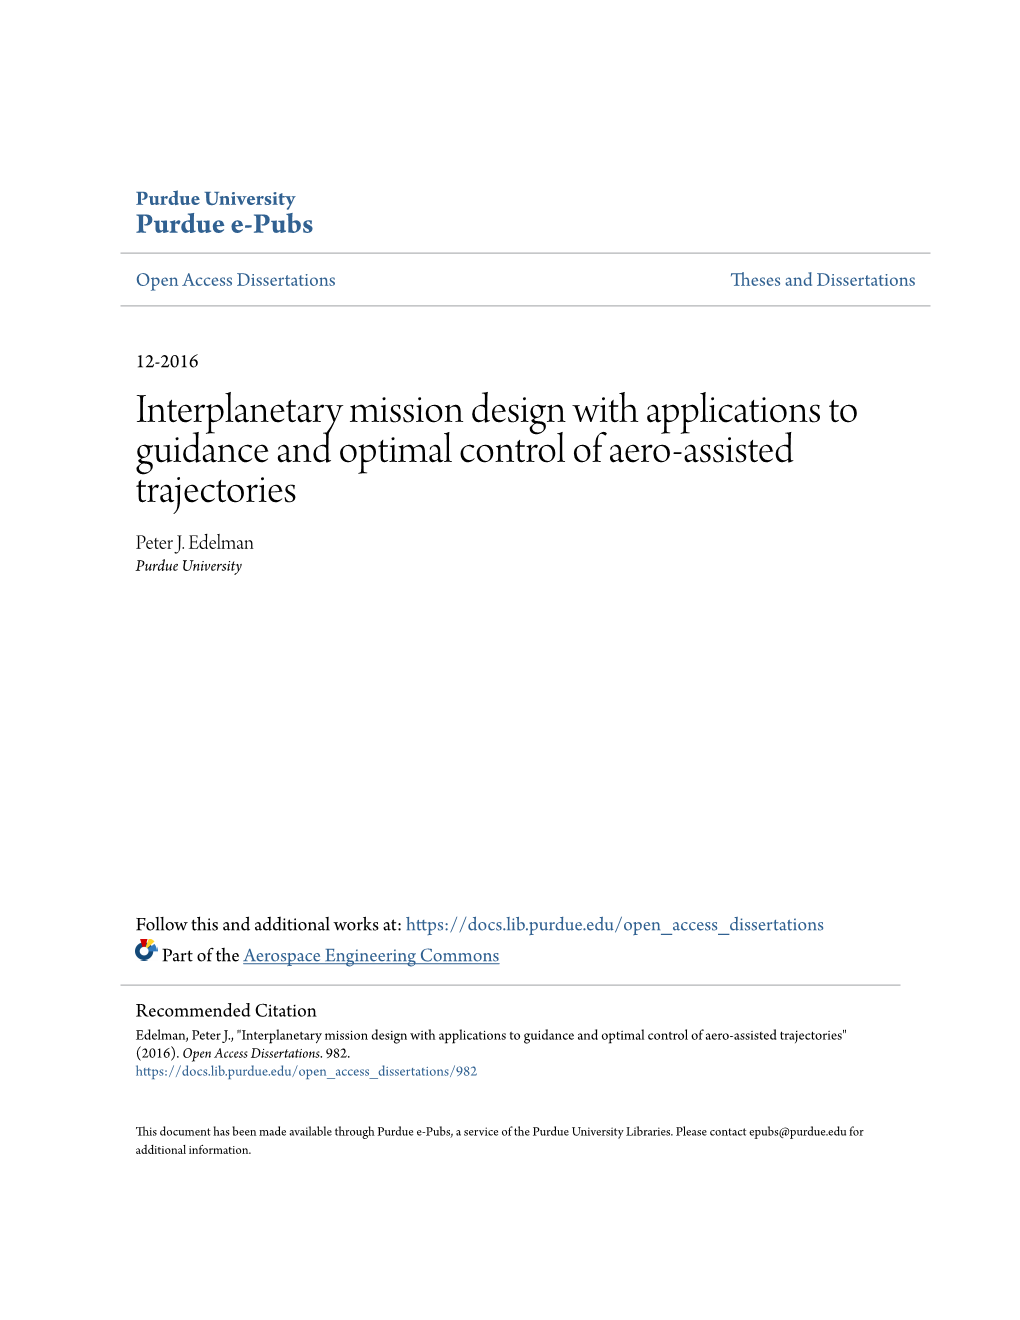 Interplanetary Mission Design with Applications to Guidance and Optimal Control of Aero-Assisted Trajectories Peter J